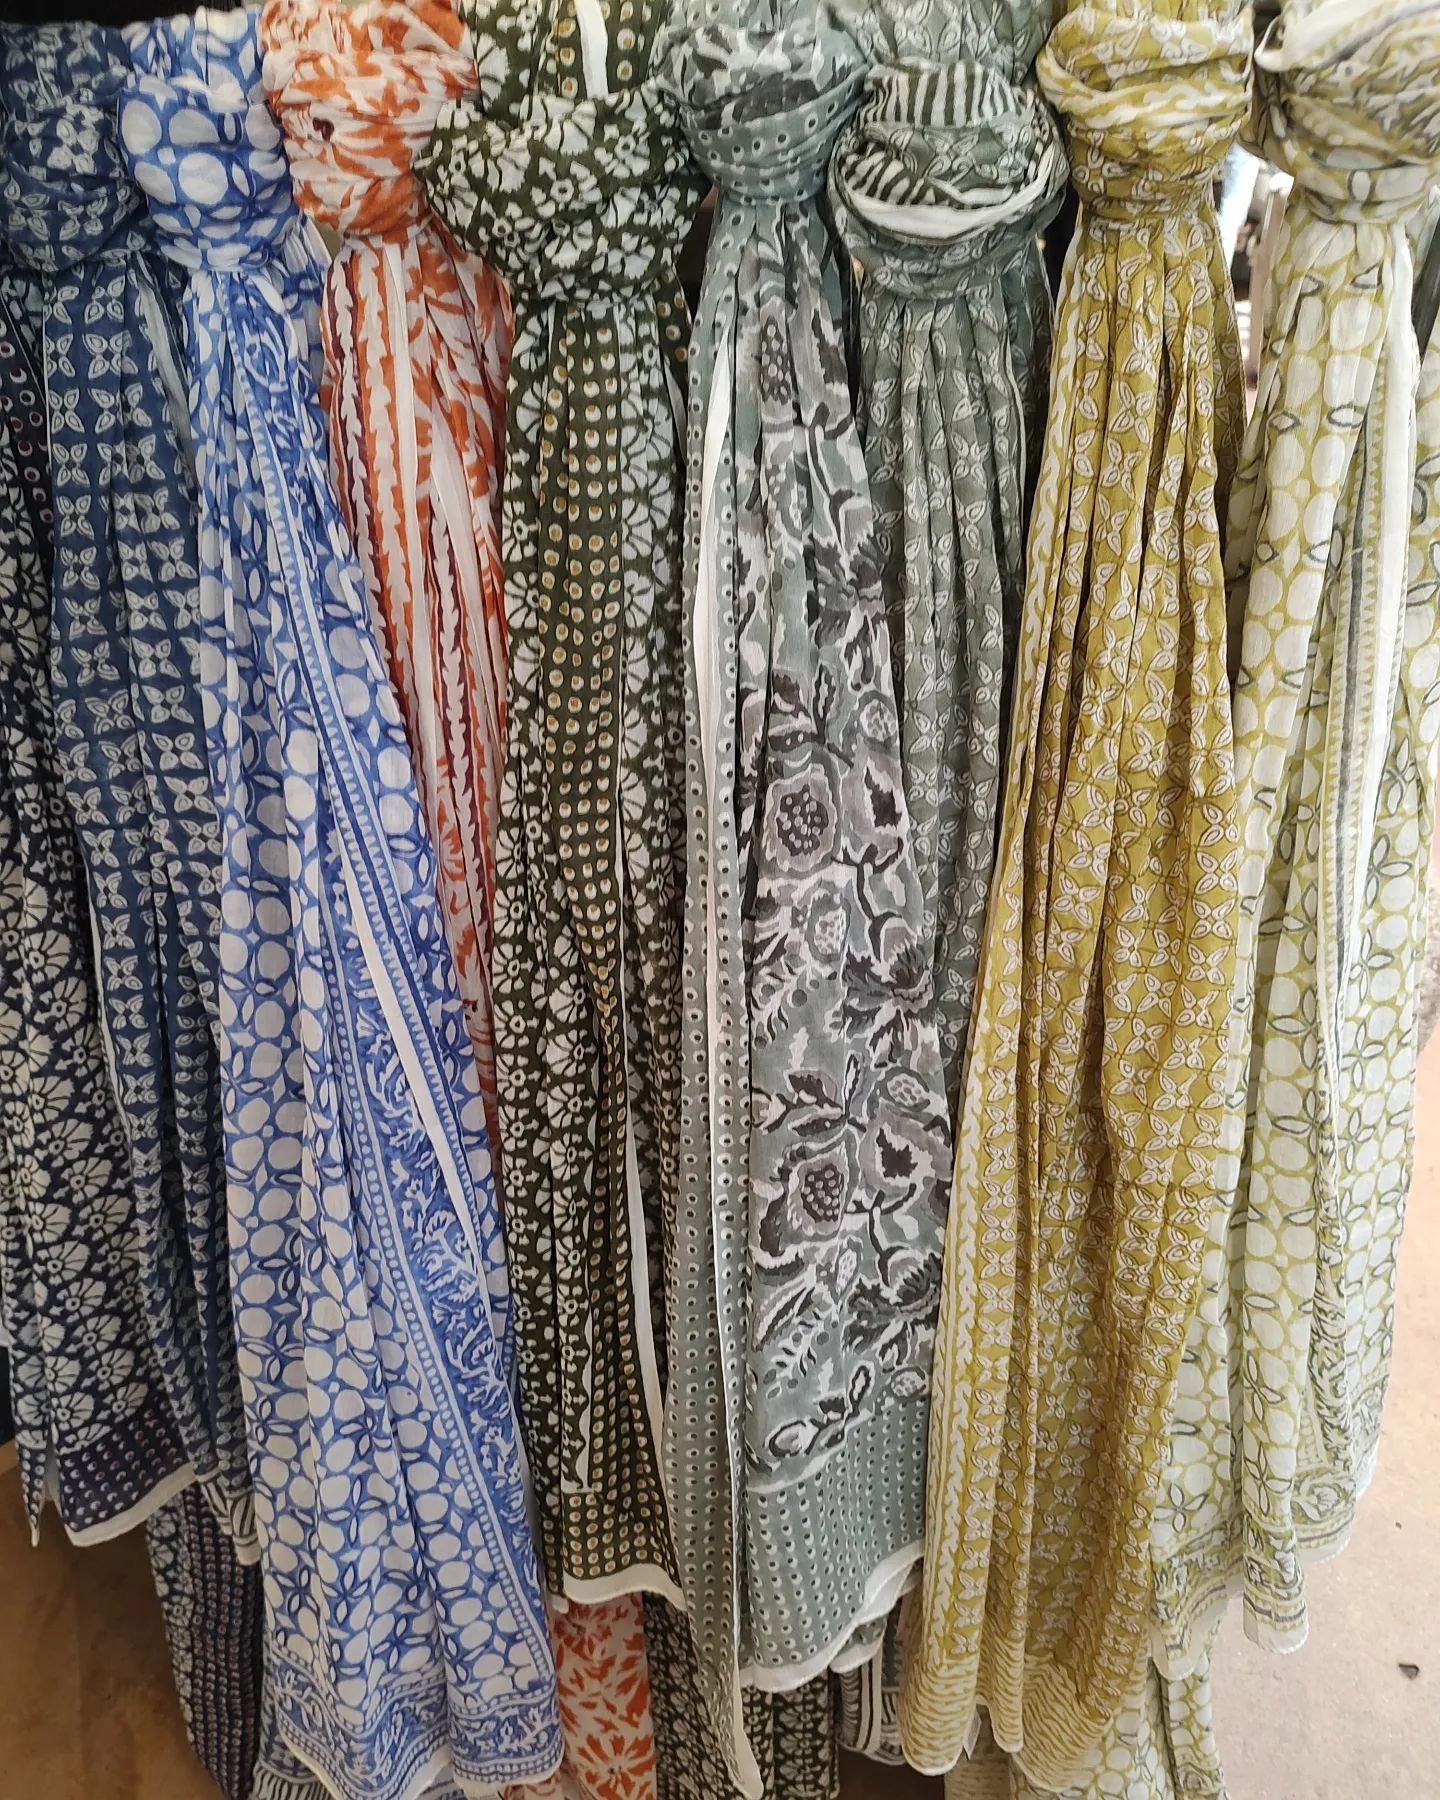 A beautiful hand blocked cotton scarf (big enough to use as a summer shawl) will give your outfit a lift!  #frenchgoods #artisanmade #color #itsawrap #38years #newprestonct #washingtonbusinessassociation